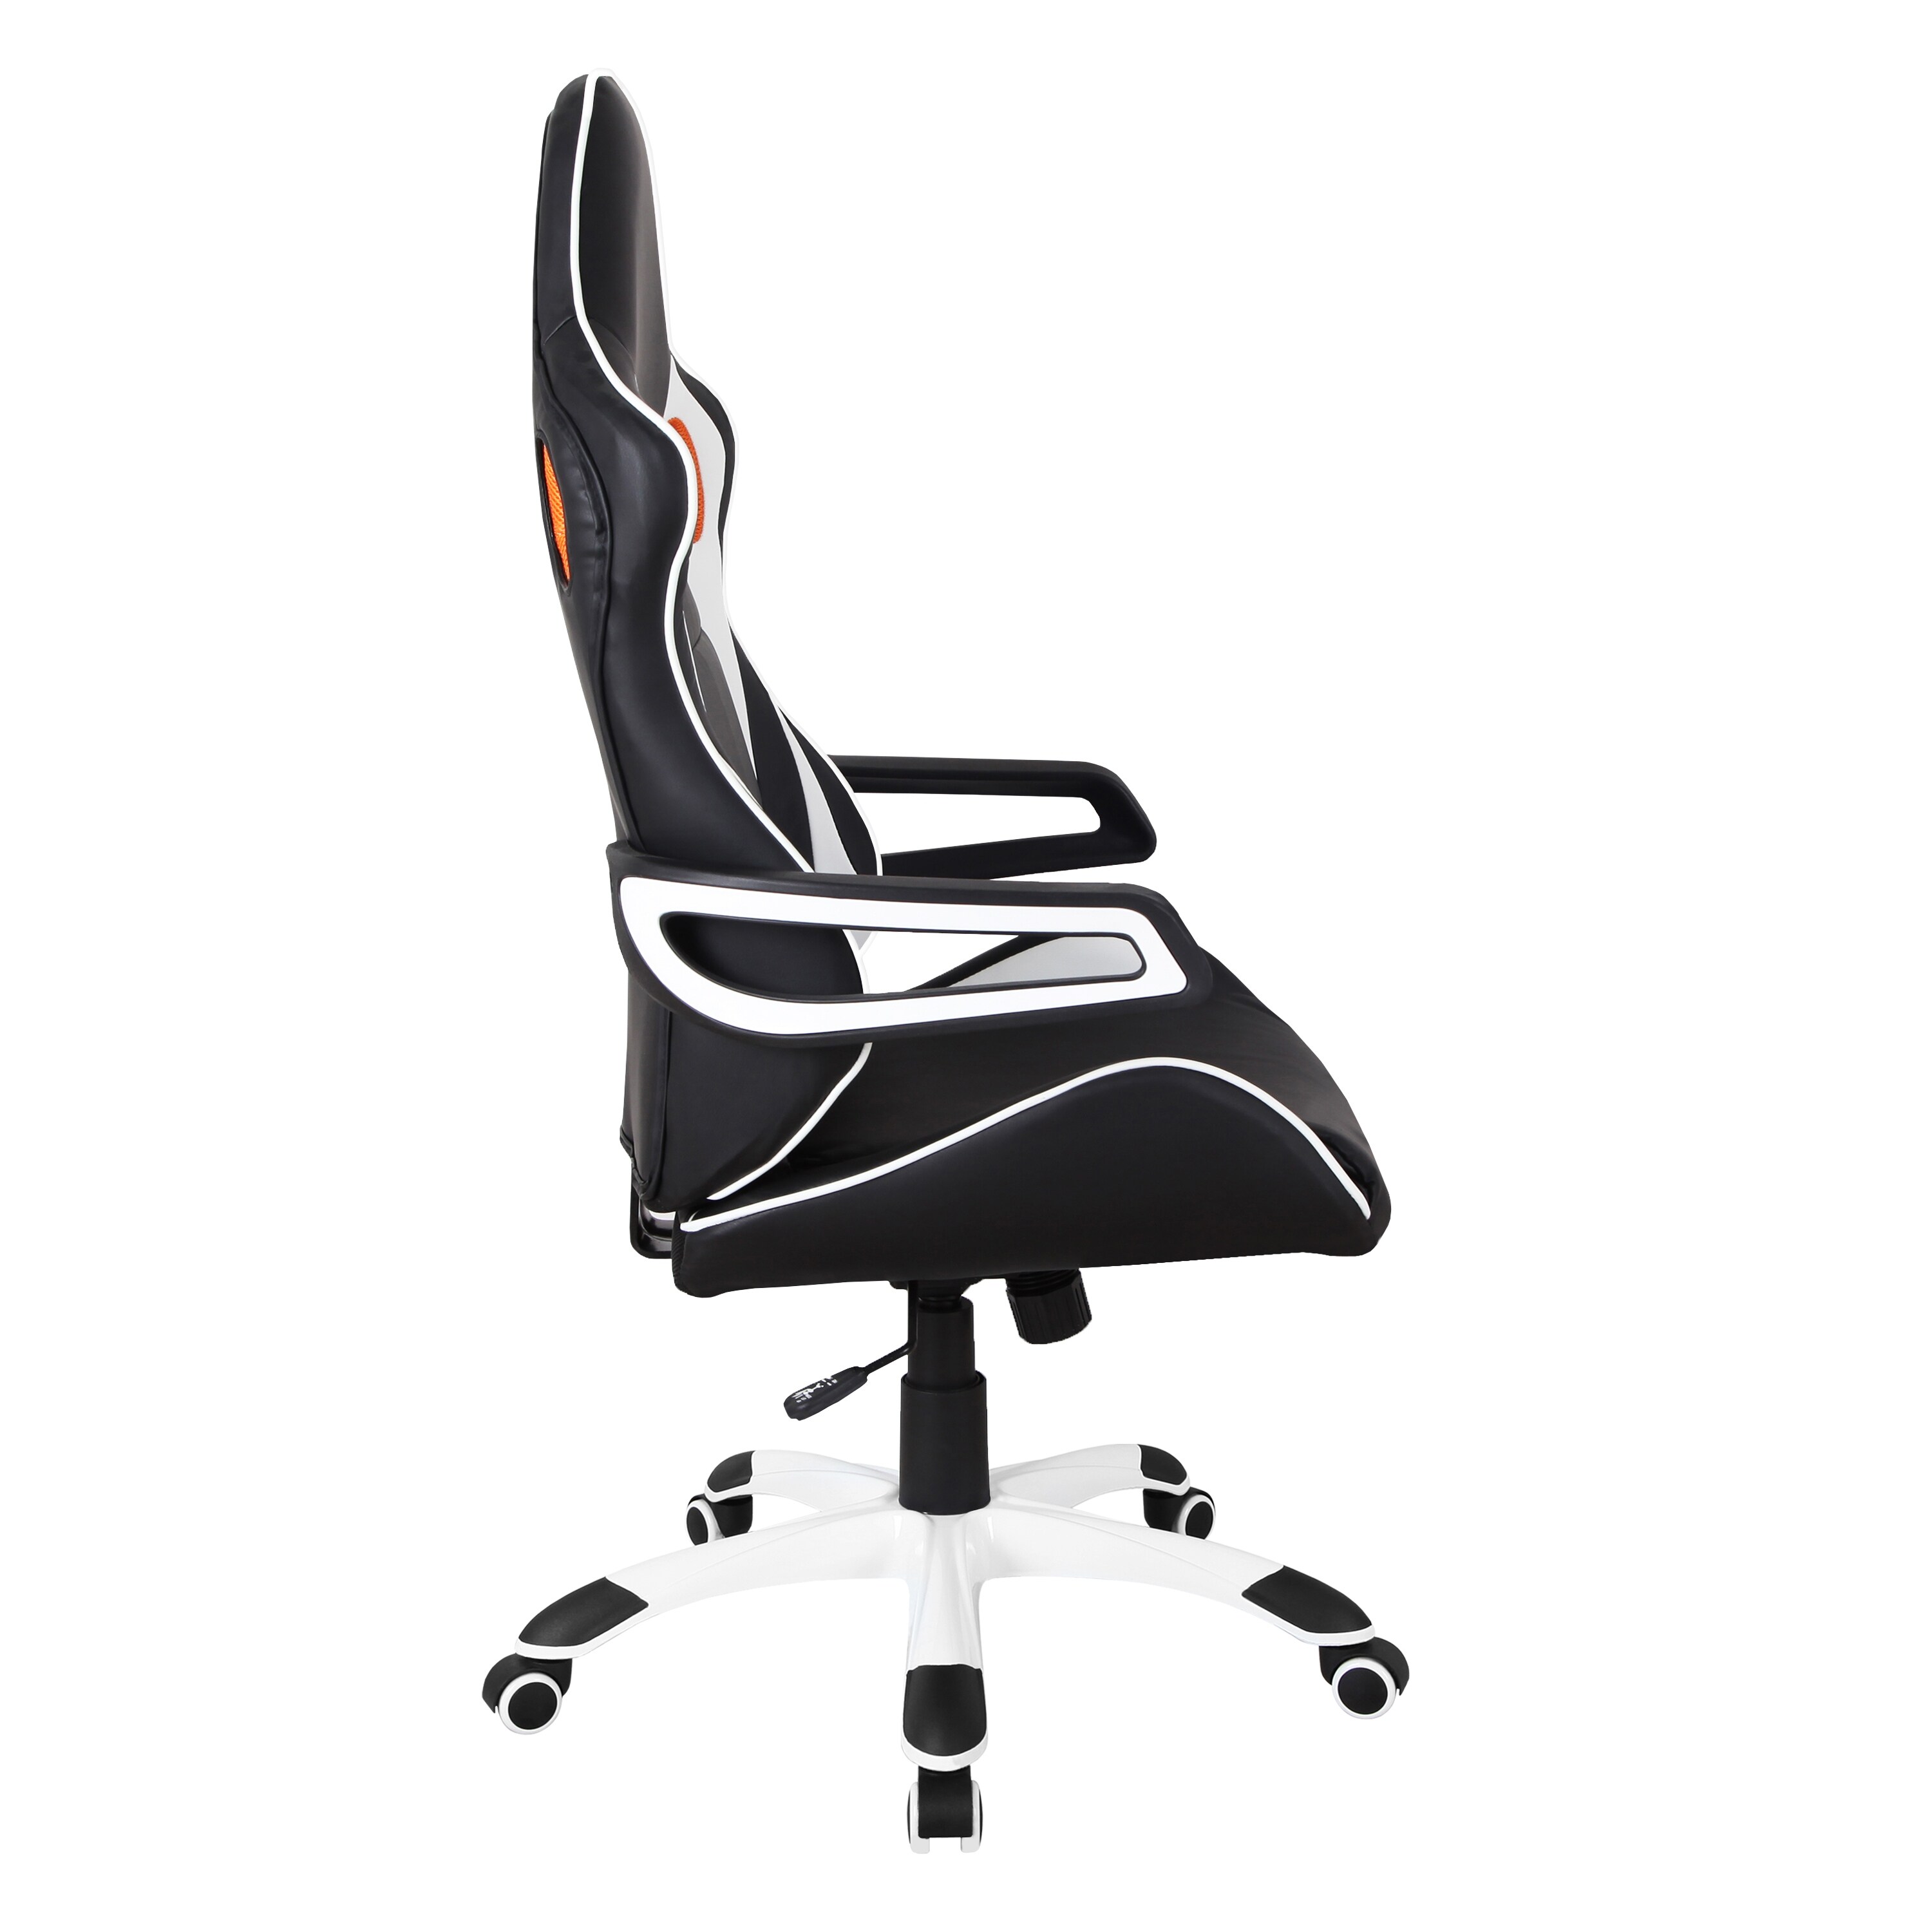 https://ak1.ostkcdn.com/images/products/is/images/direct/3ff89cfb4ae164c4d81cee29e9085194f316bf52/Gaming-Chair-Racing-Style-Office-Chair%2C-Black.jpg